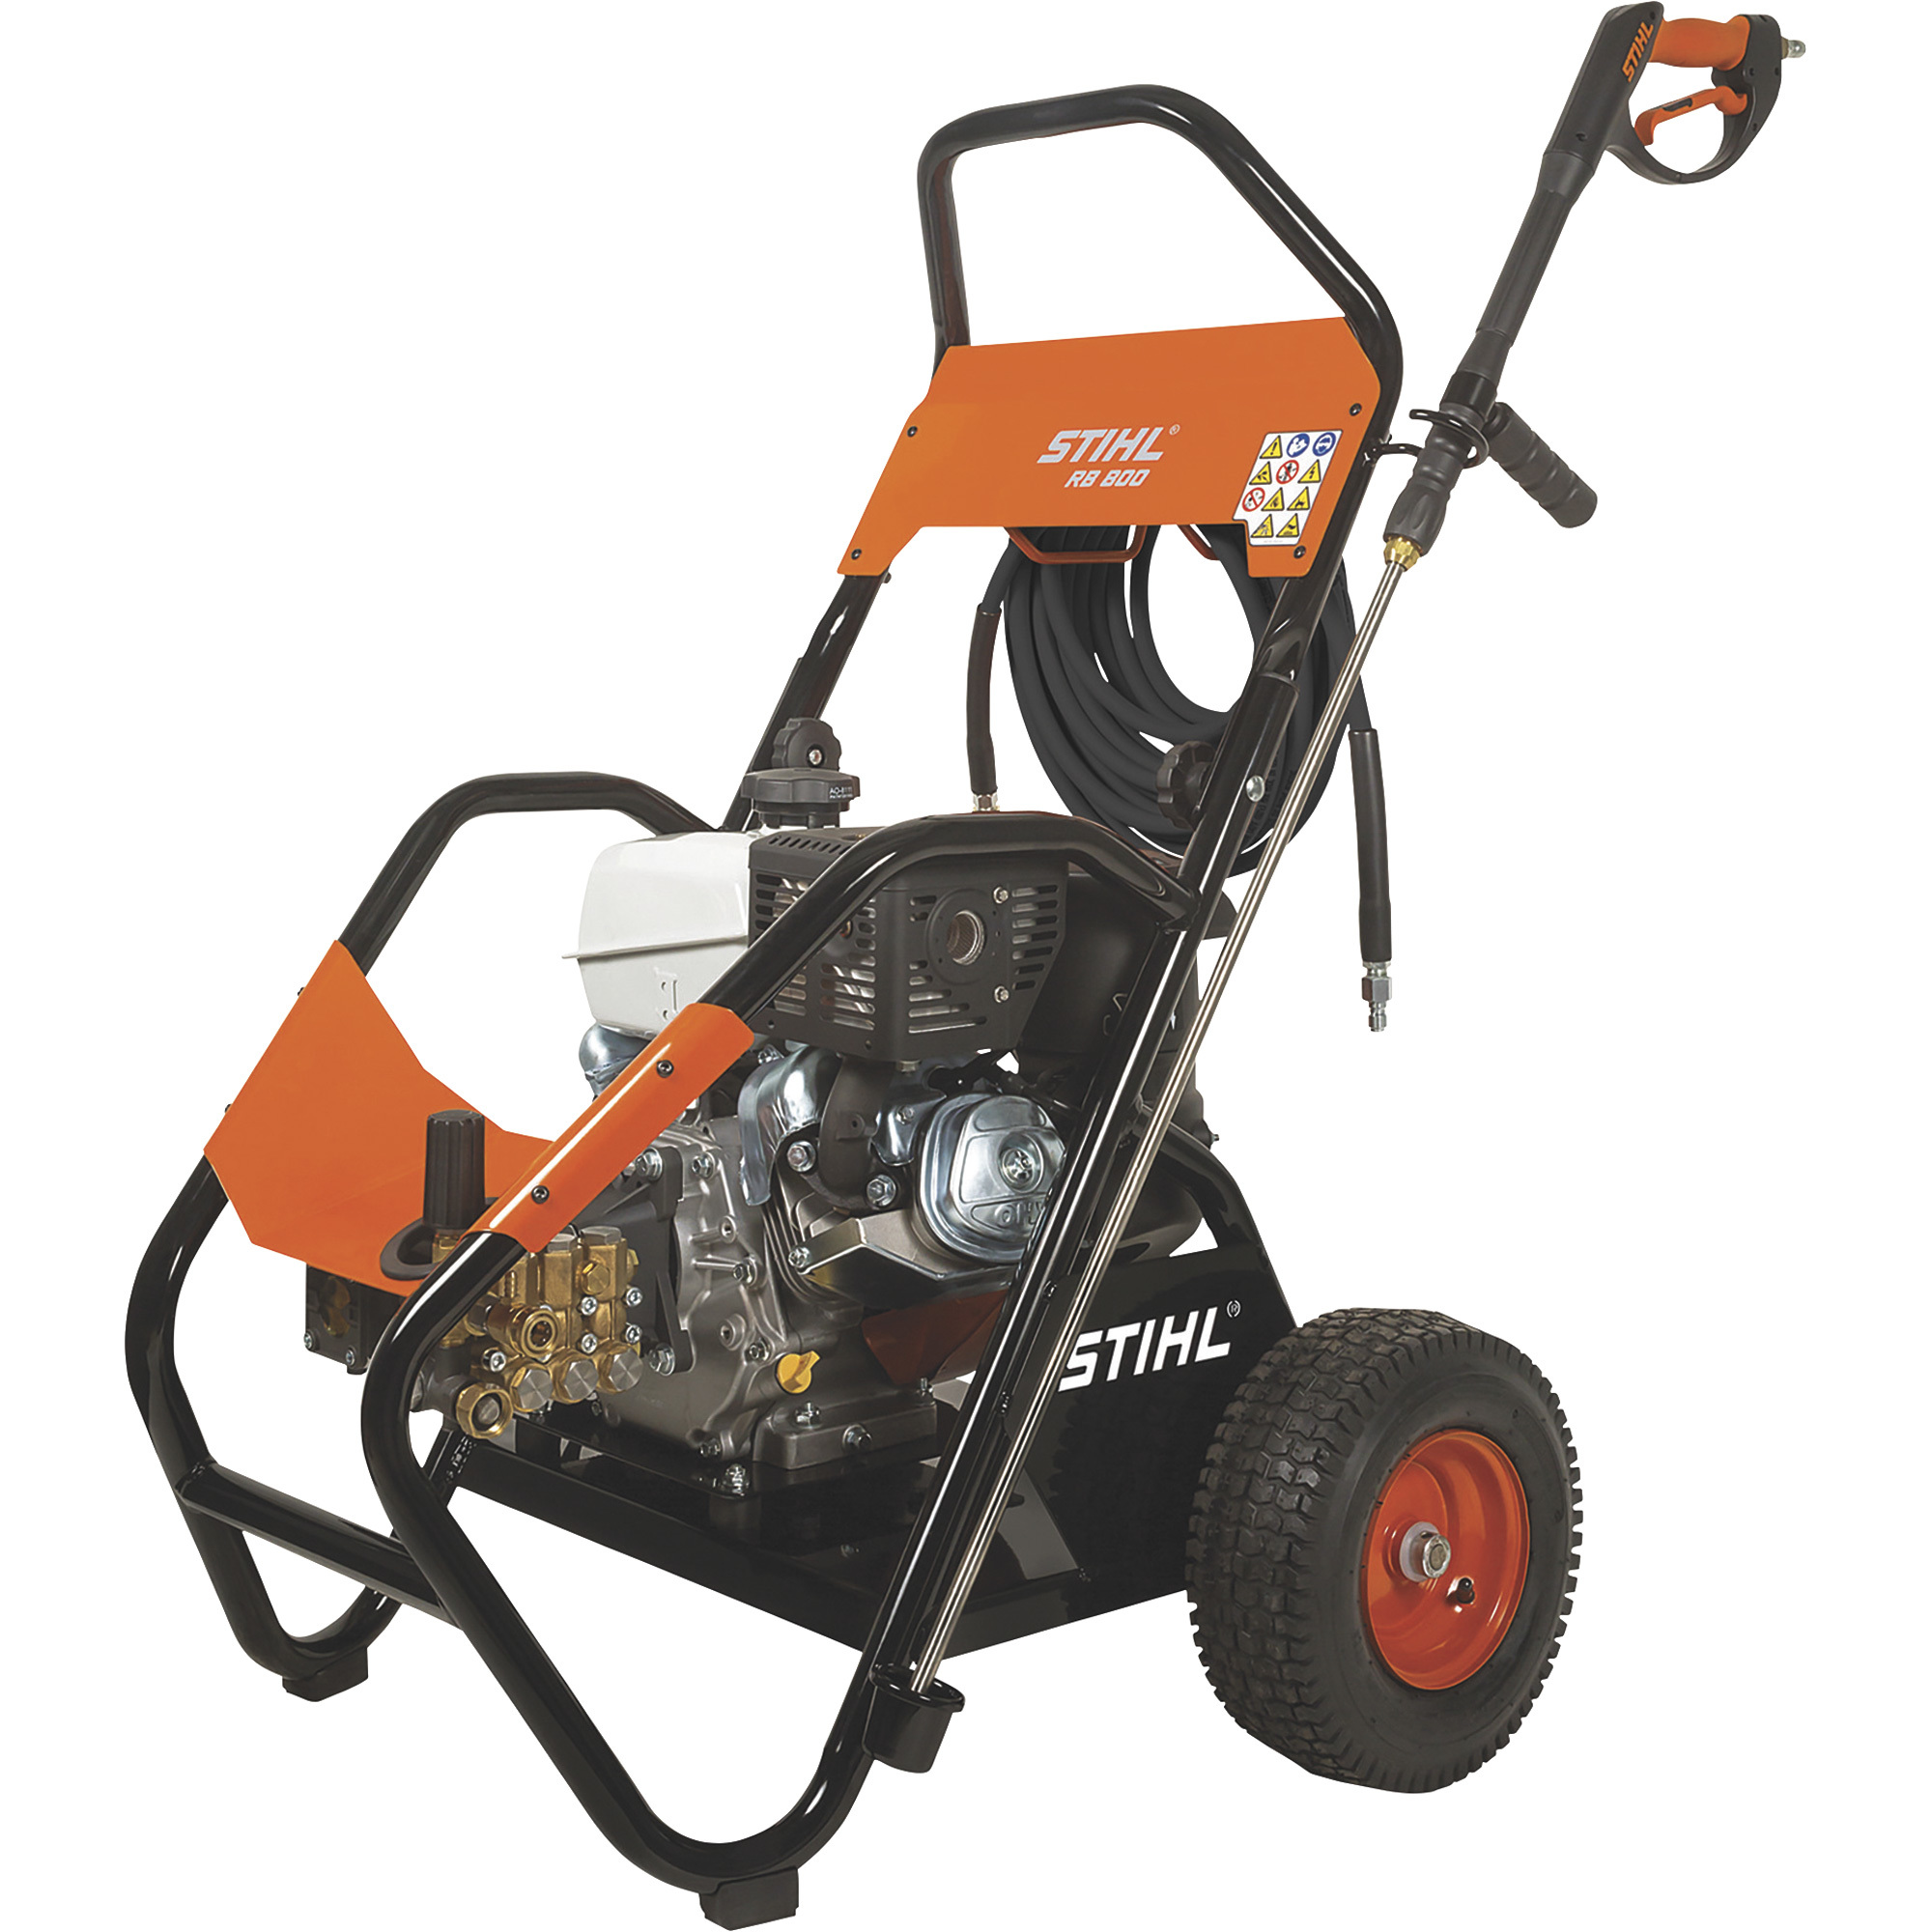 Stihl Professional Gas-Powered Cold Water Pressure Washer â 4200 PSI, 4.0 GPM, Model RB 800